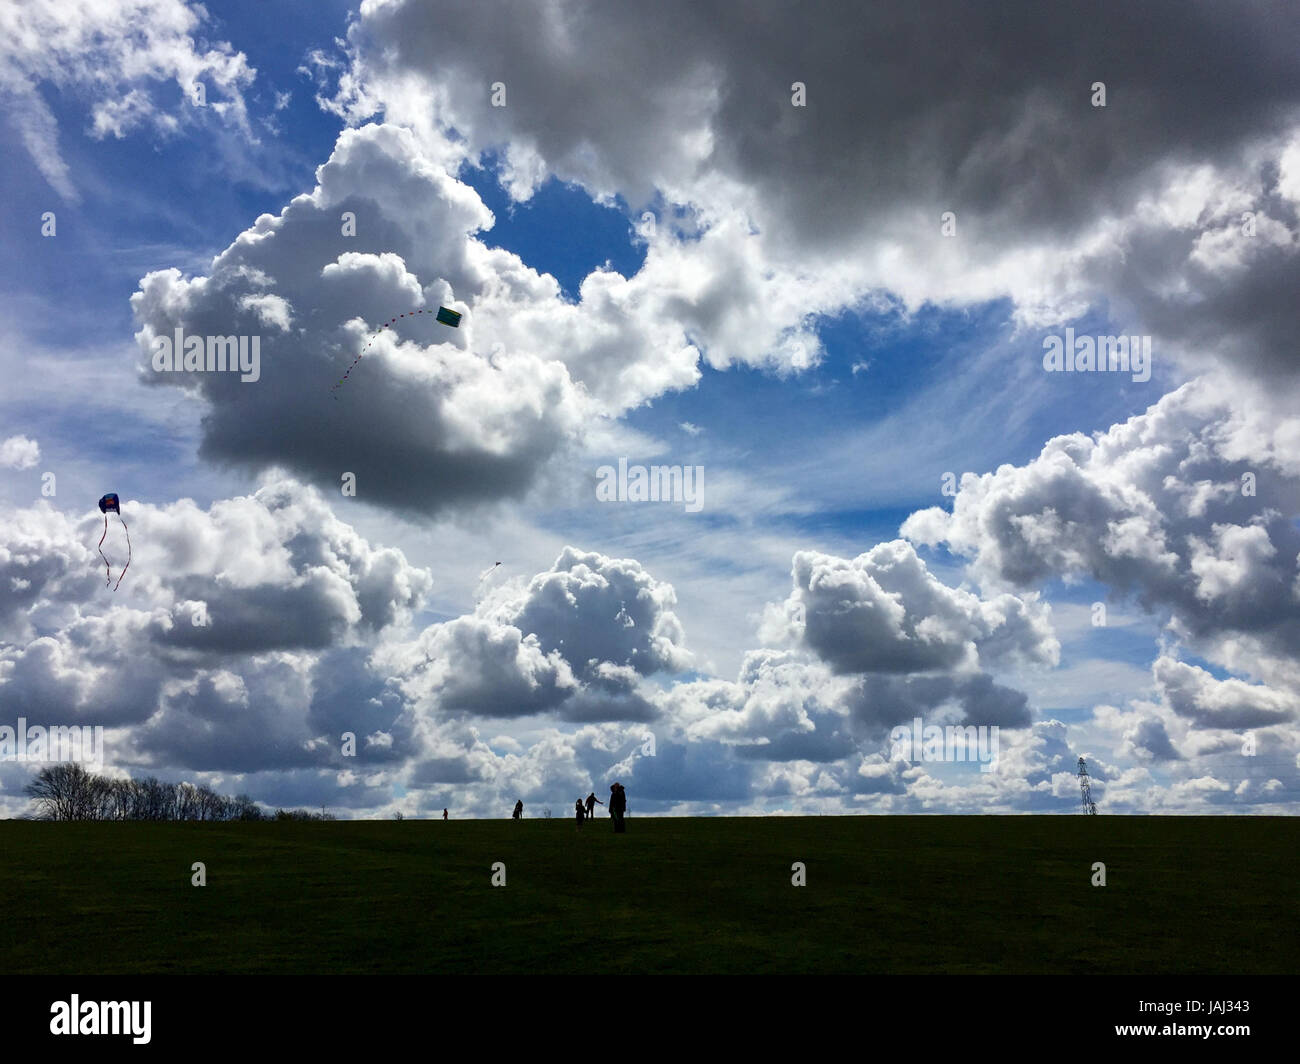 Kite flying on a sunny and cloudy day Stock Photo